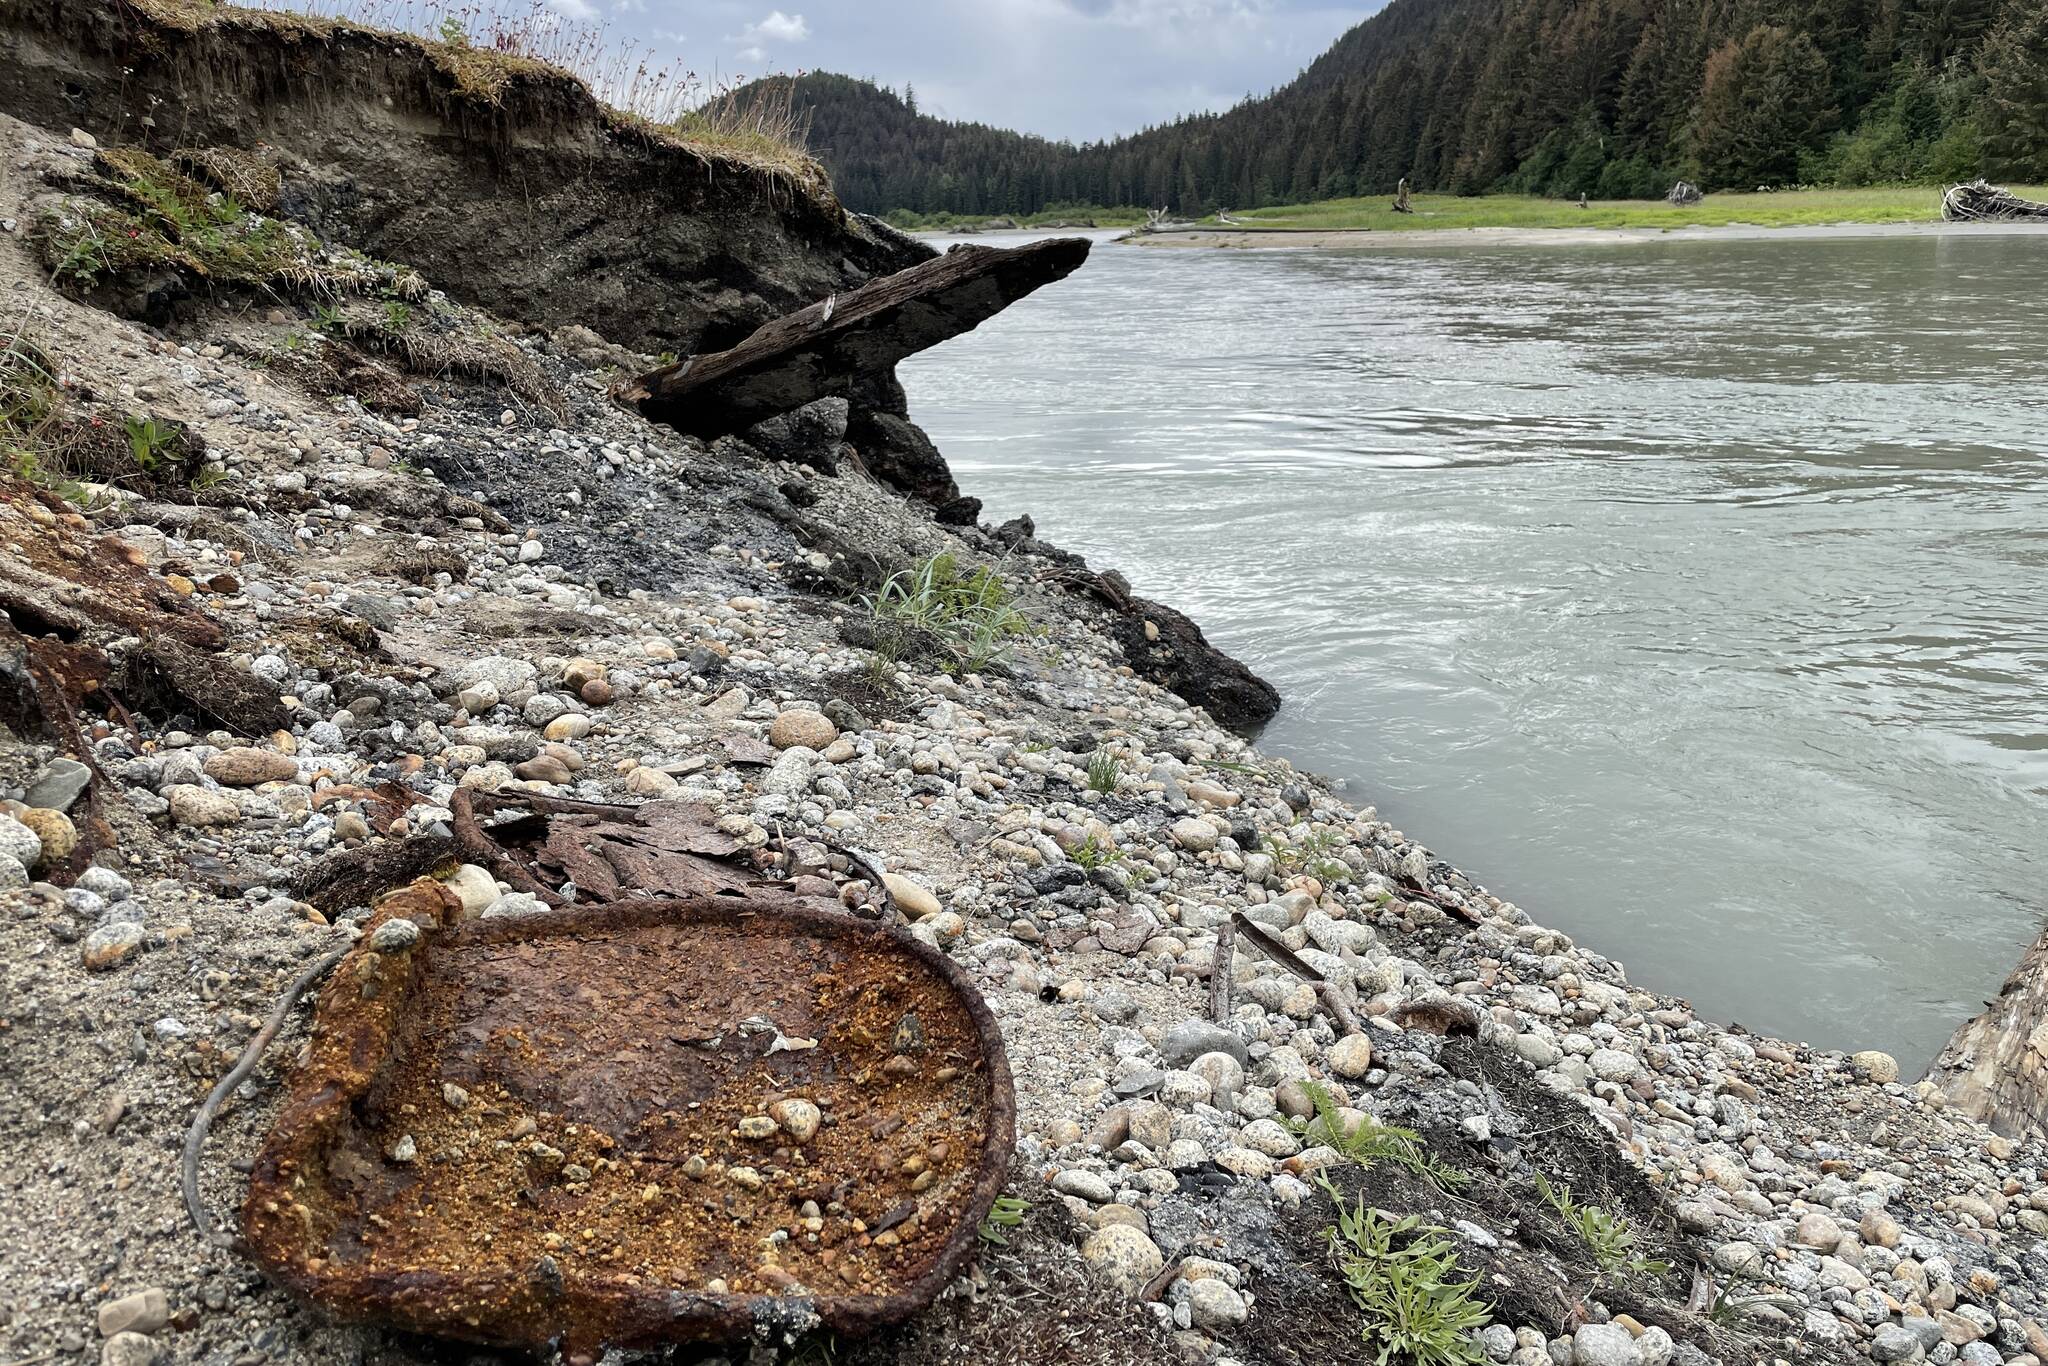 Rusted oil barrels are visible on the riverbank of the Eagle River as erosion exposes more debris from roadbuilding infrastructure buried decades. (Michael S. Lockett / Juneau Empire)